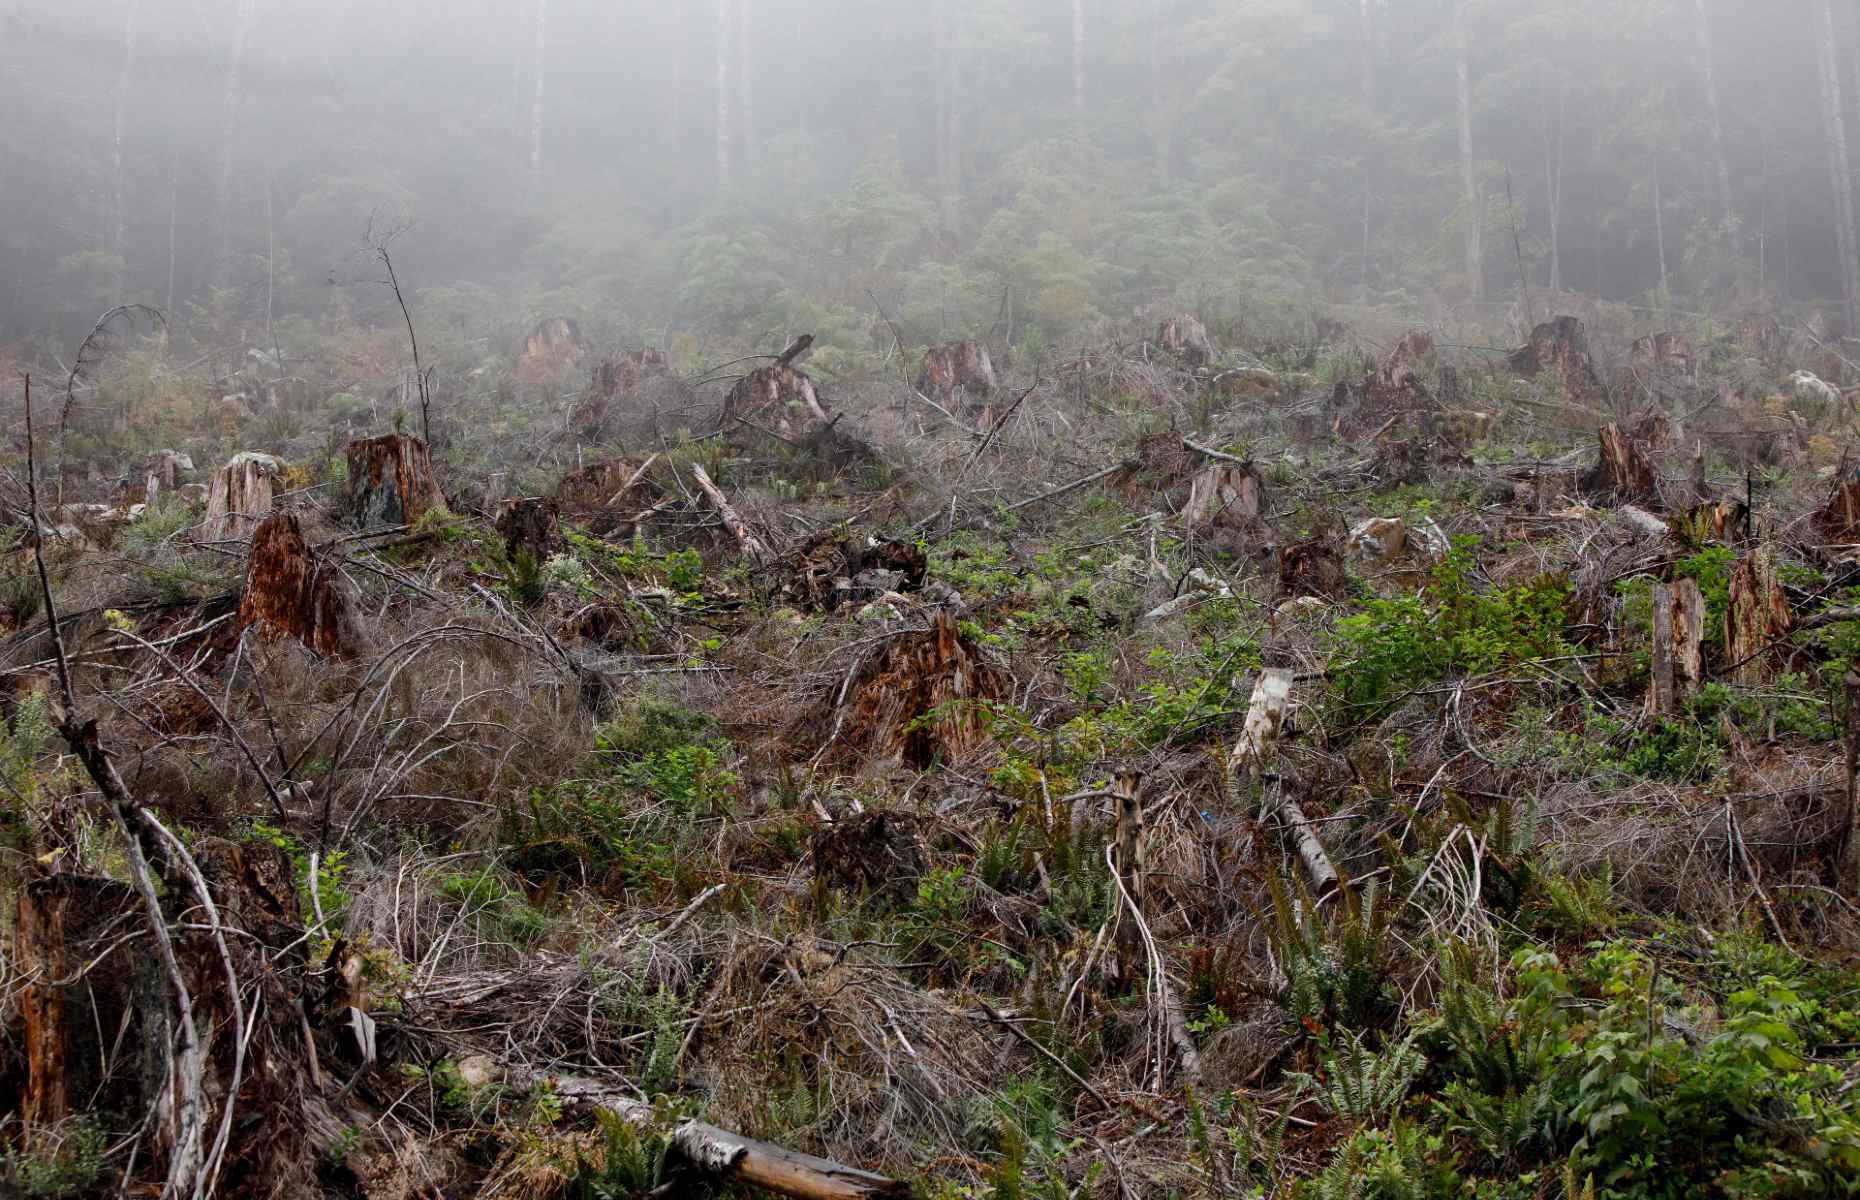 Stumps from previously destroyed trees in Fairy Creek [Image: COLE BURSTON/AFP/Getty Images]